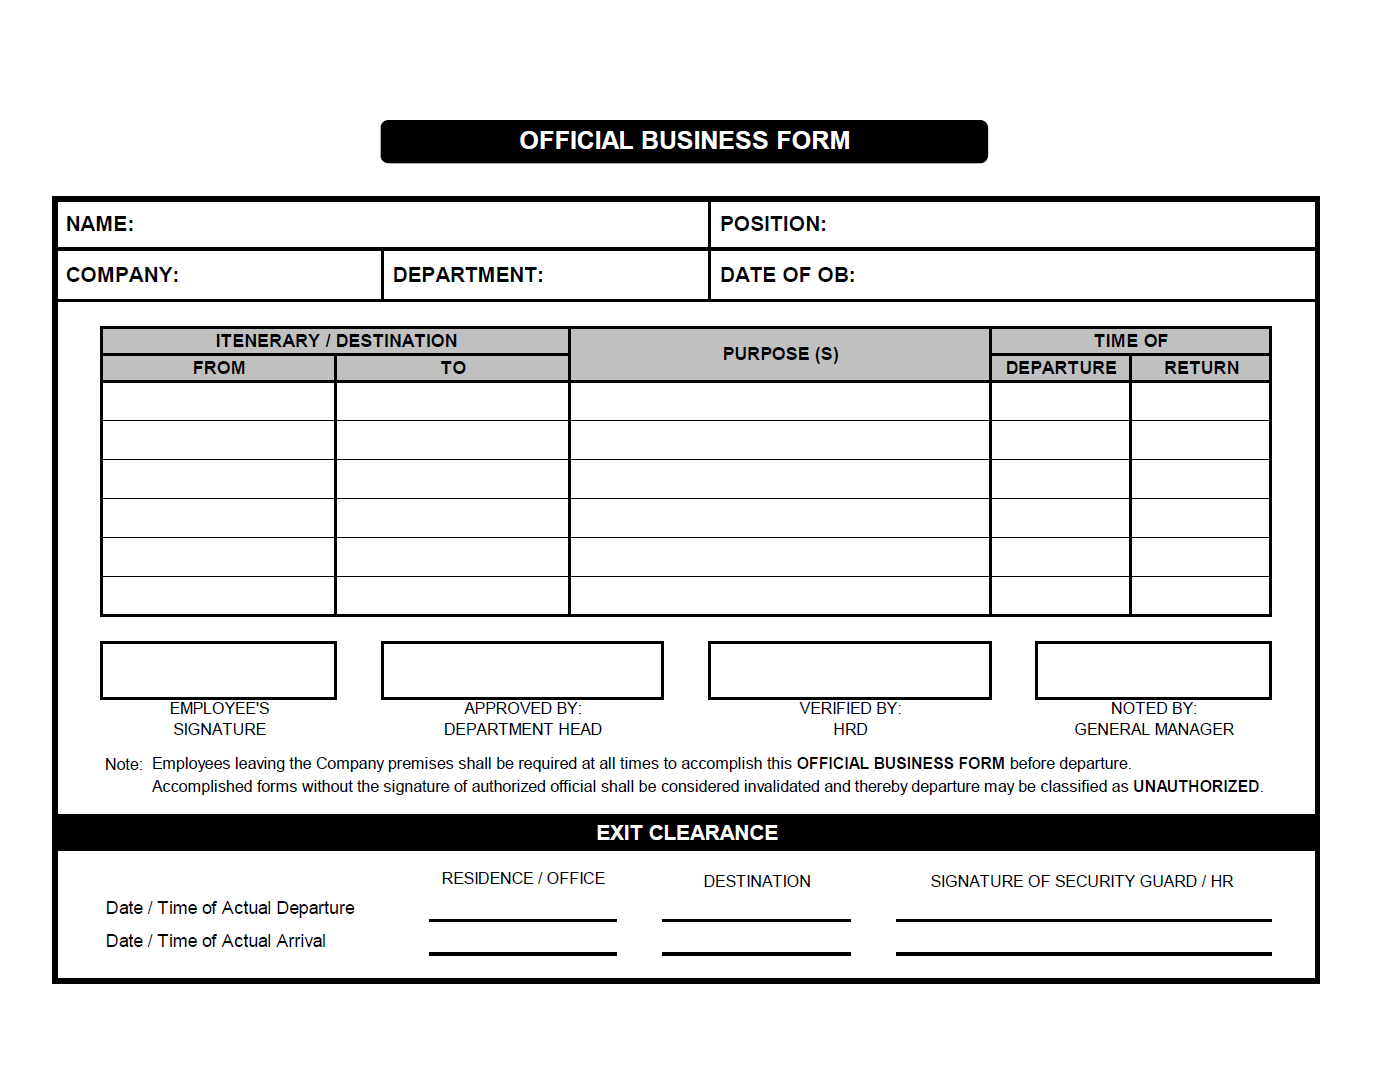 Official Business Form main image